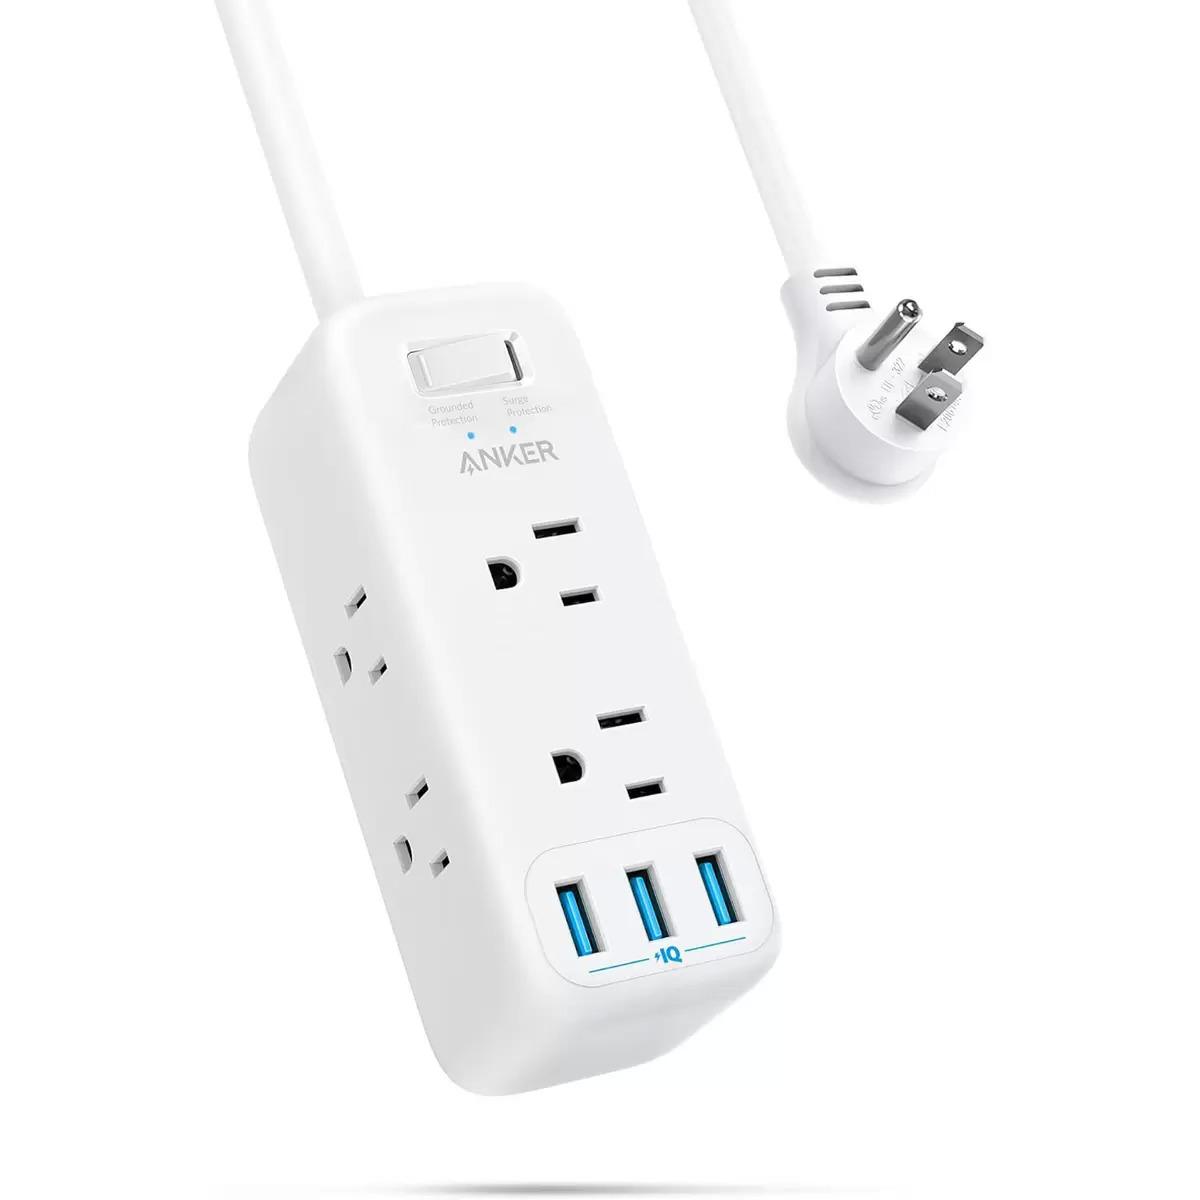 Anker USB 300J 331 Power Strip Surge Protector for $13 Shipped